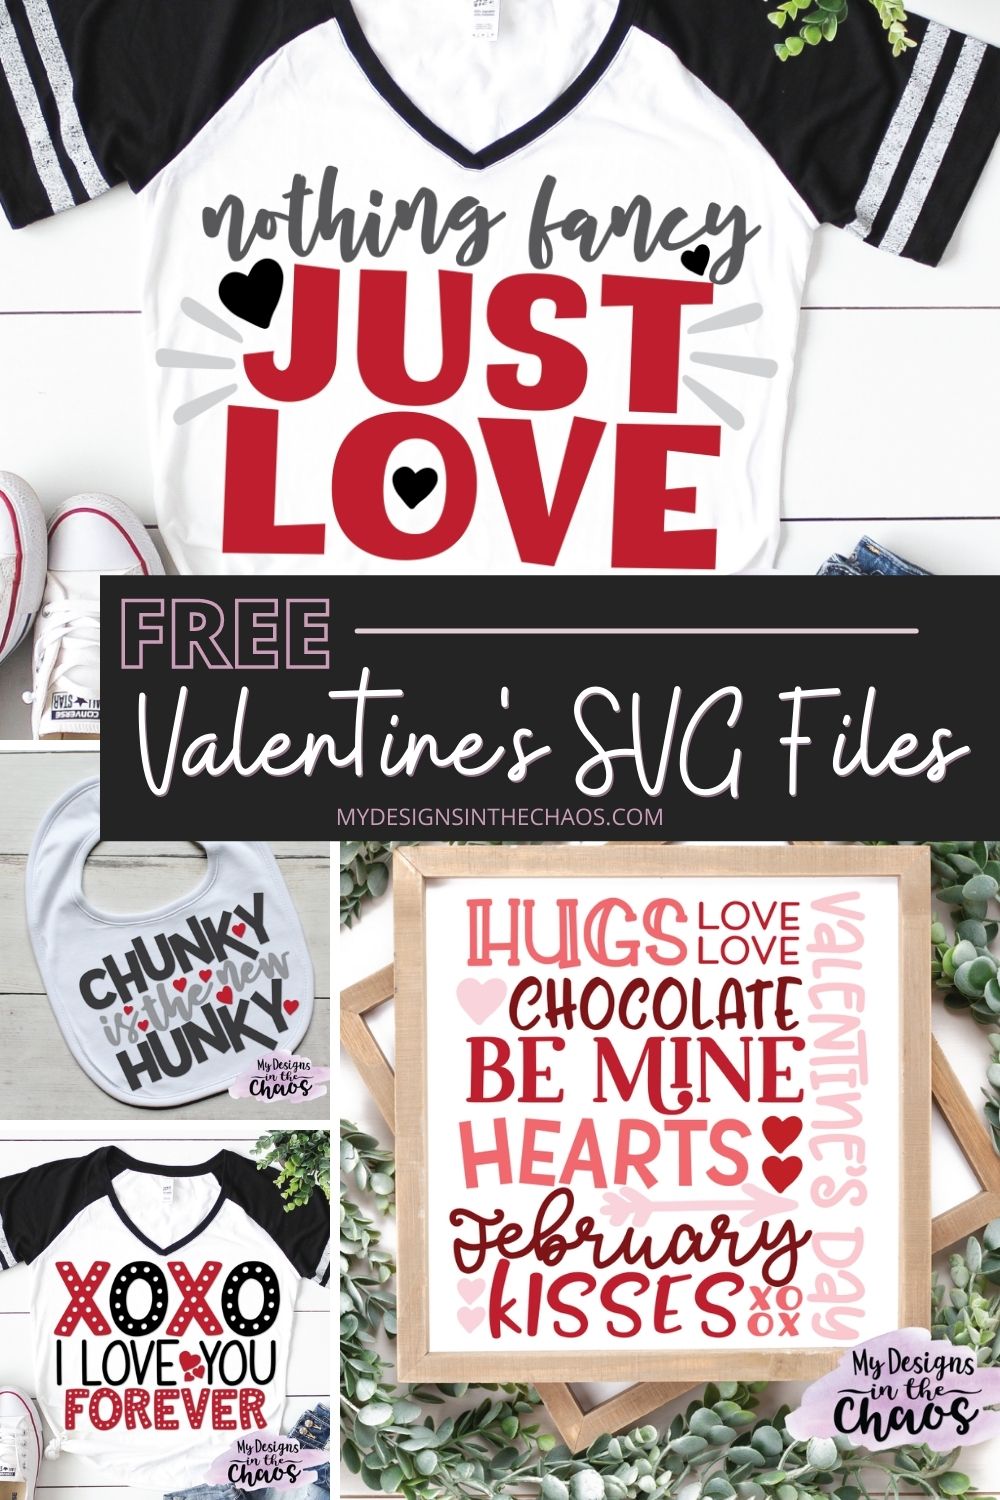 Free Valentine’s SVG Files - My Designs In the Chaos